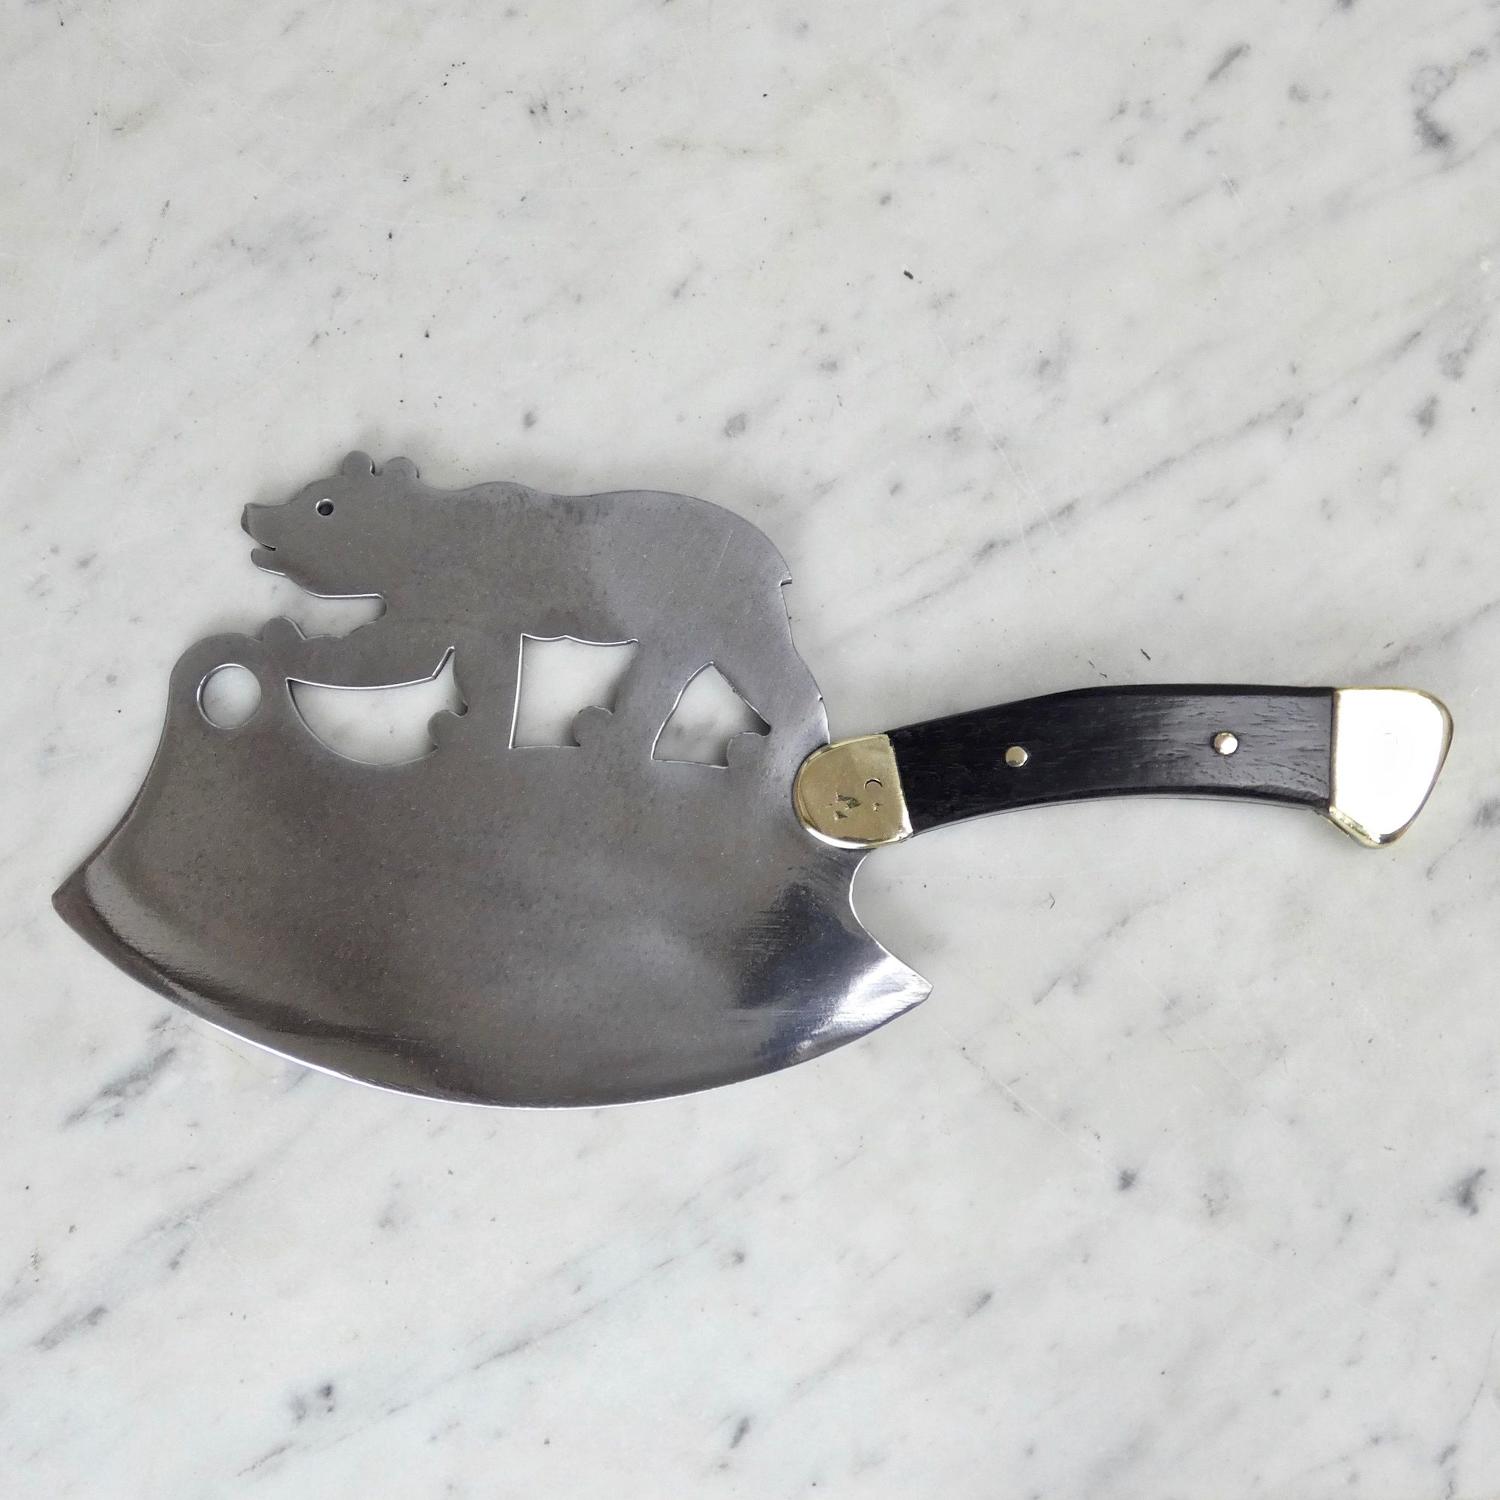 Ice cleaver in the shape of a bear